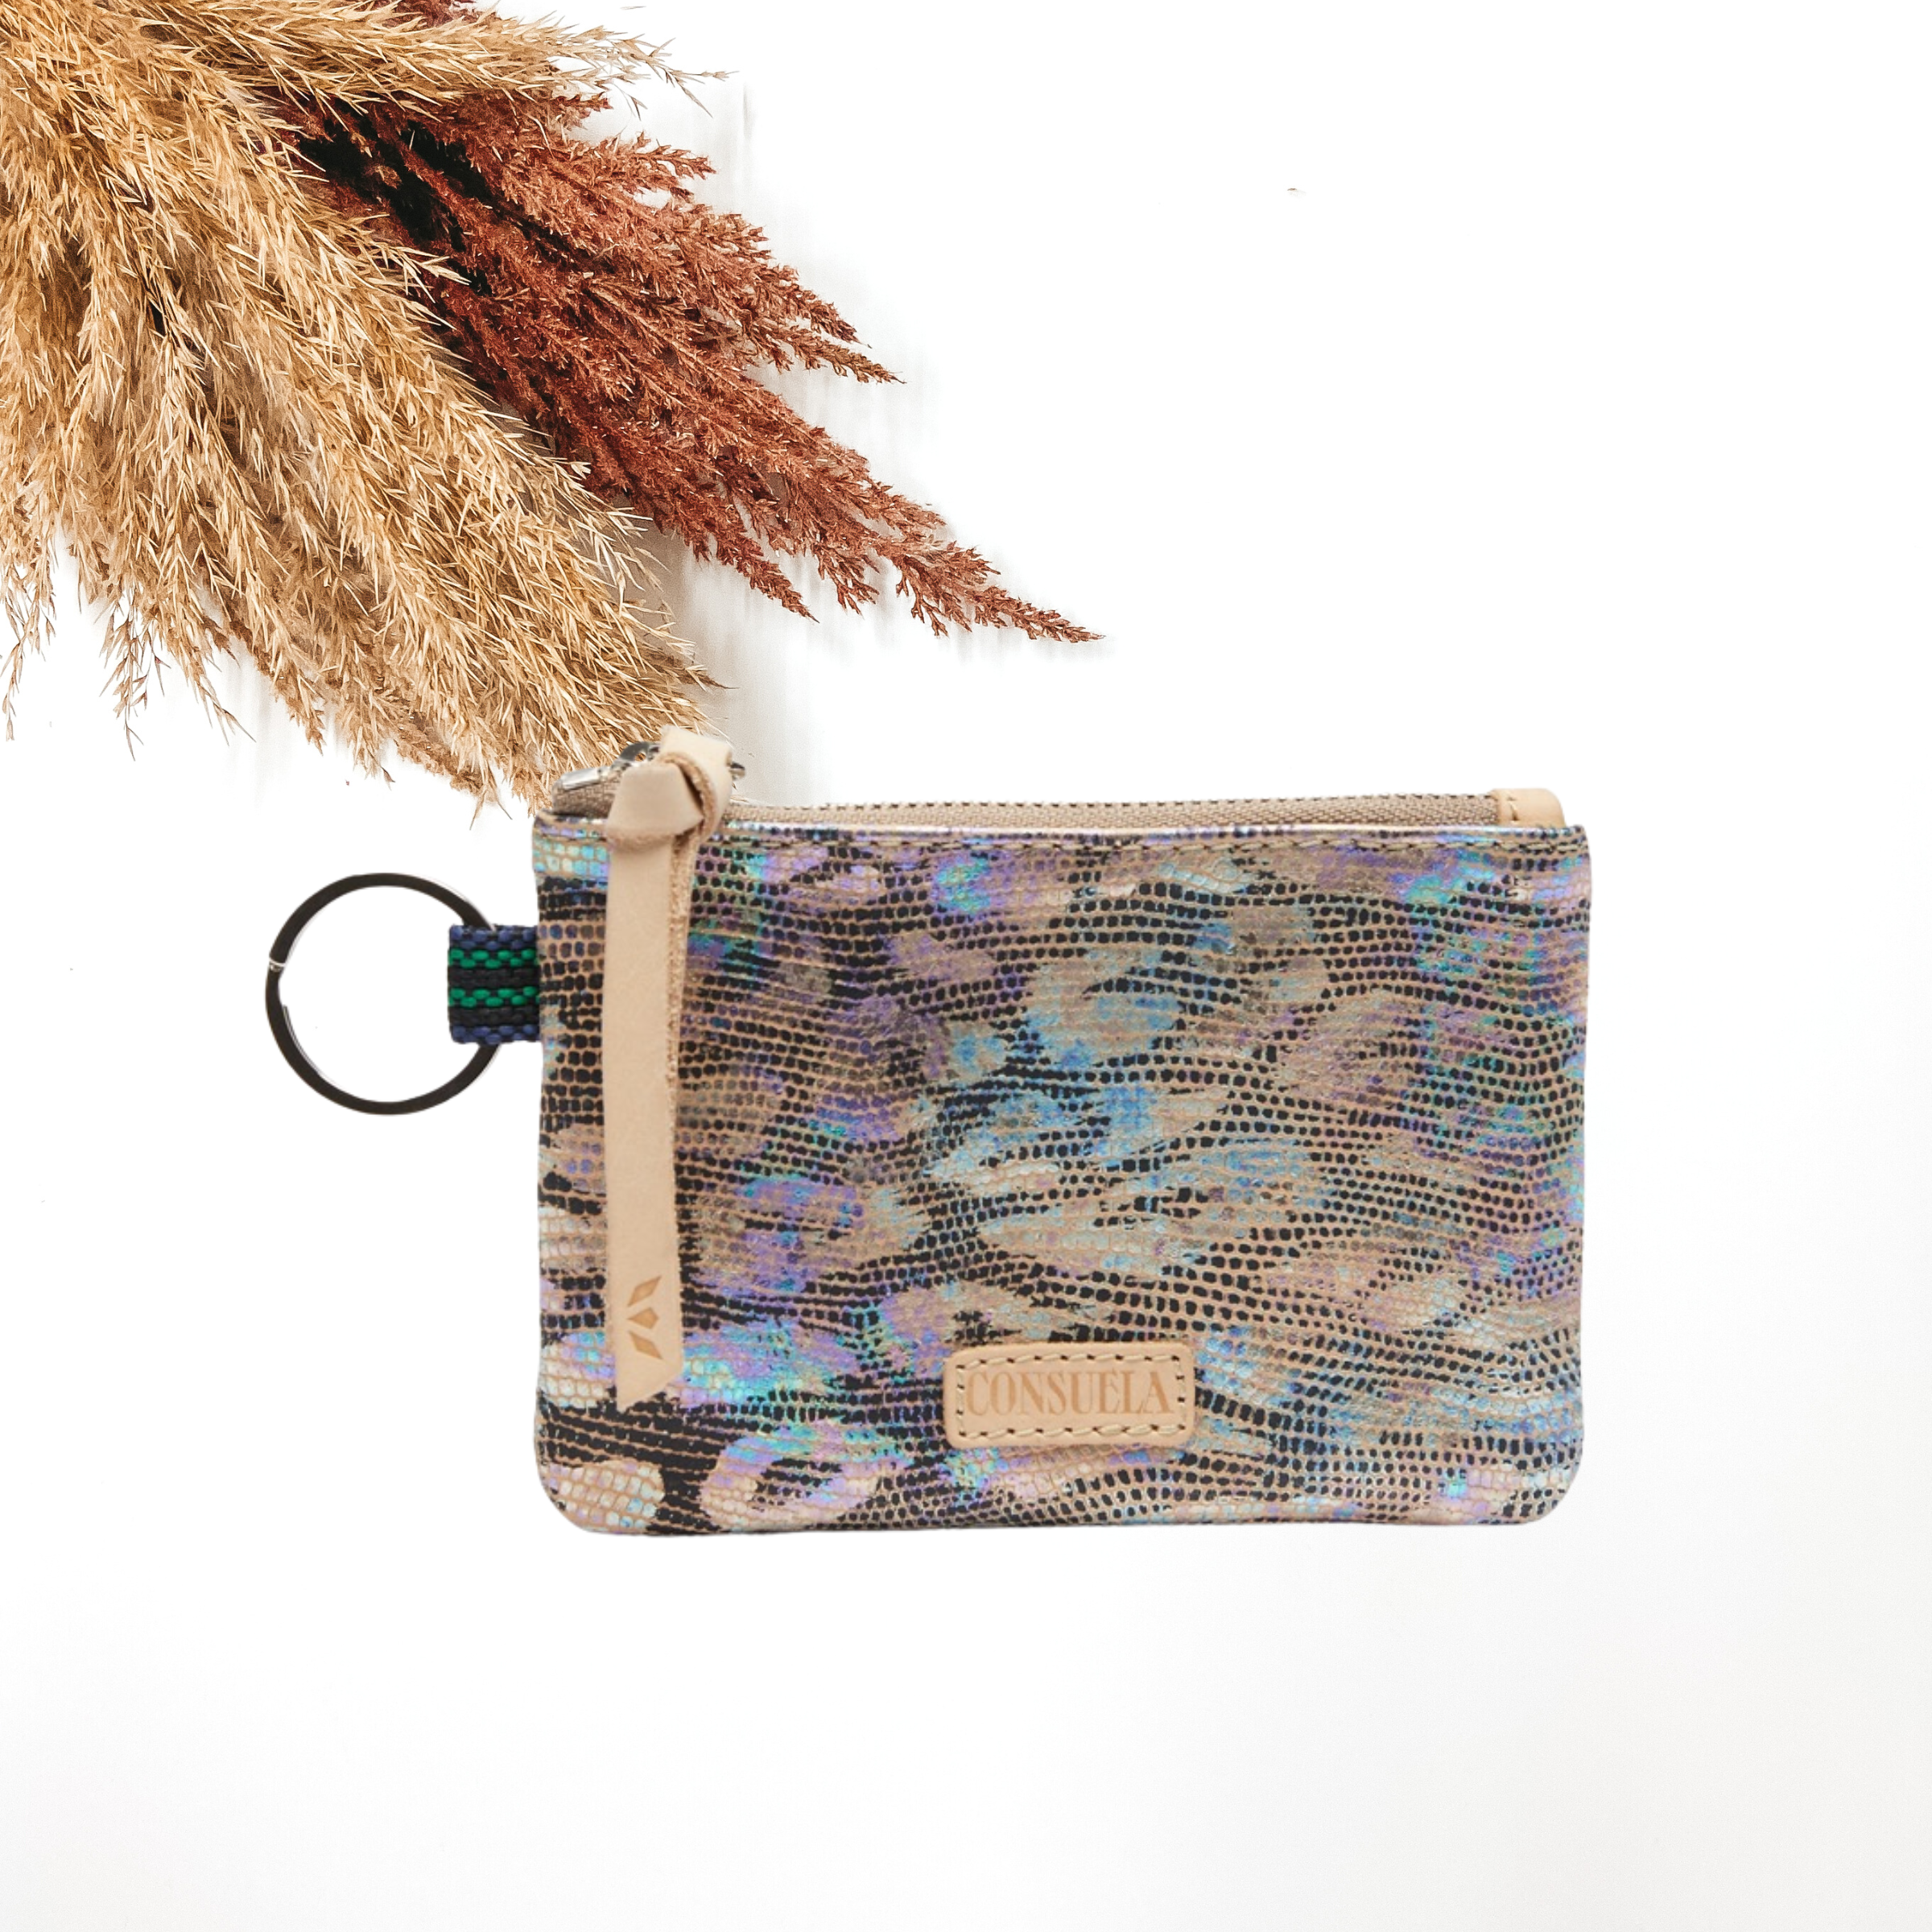 Small, rectangle pouch with a silver key ring on the left side and a light tan zipper pull. This pouch has a iridescent, multicolored leopard print design. This purse is pictured on a white background with tan and brown pompous grass on the right side.